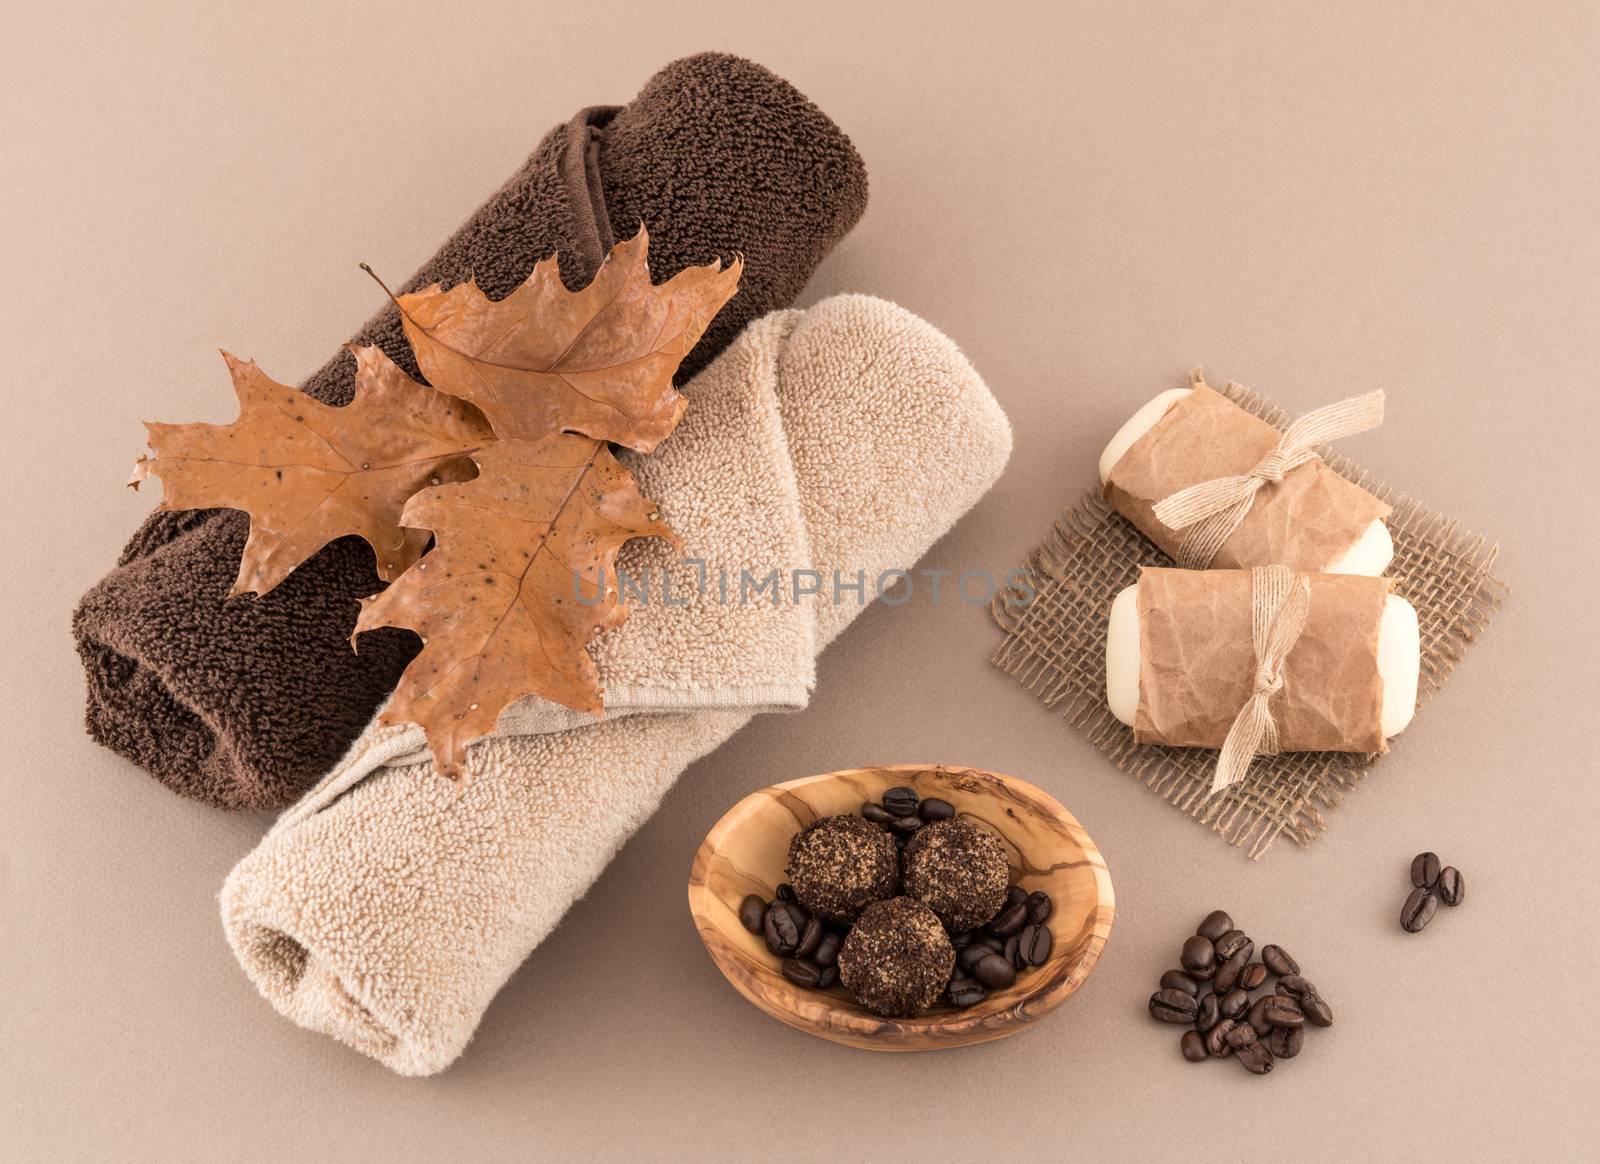 Autumn spa scene with coffee bath bombs, artisan soap, luxury towels, coffee beans, and autumn leaves on tan background